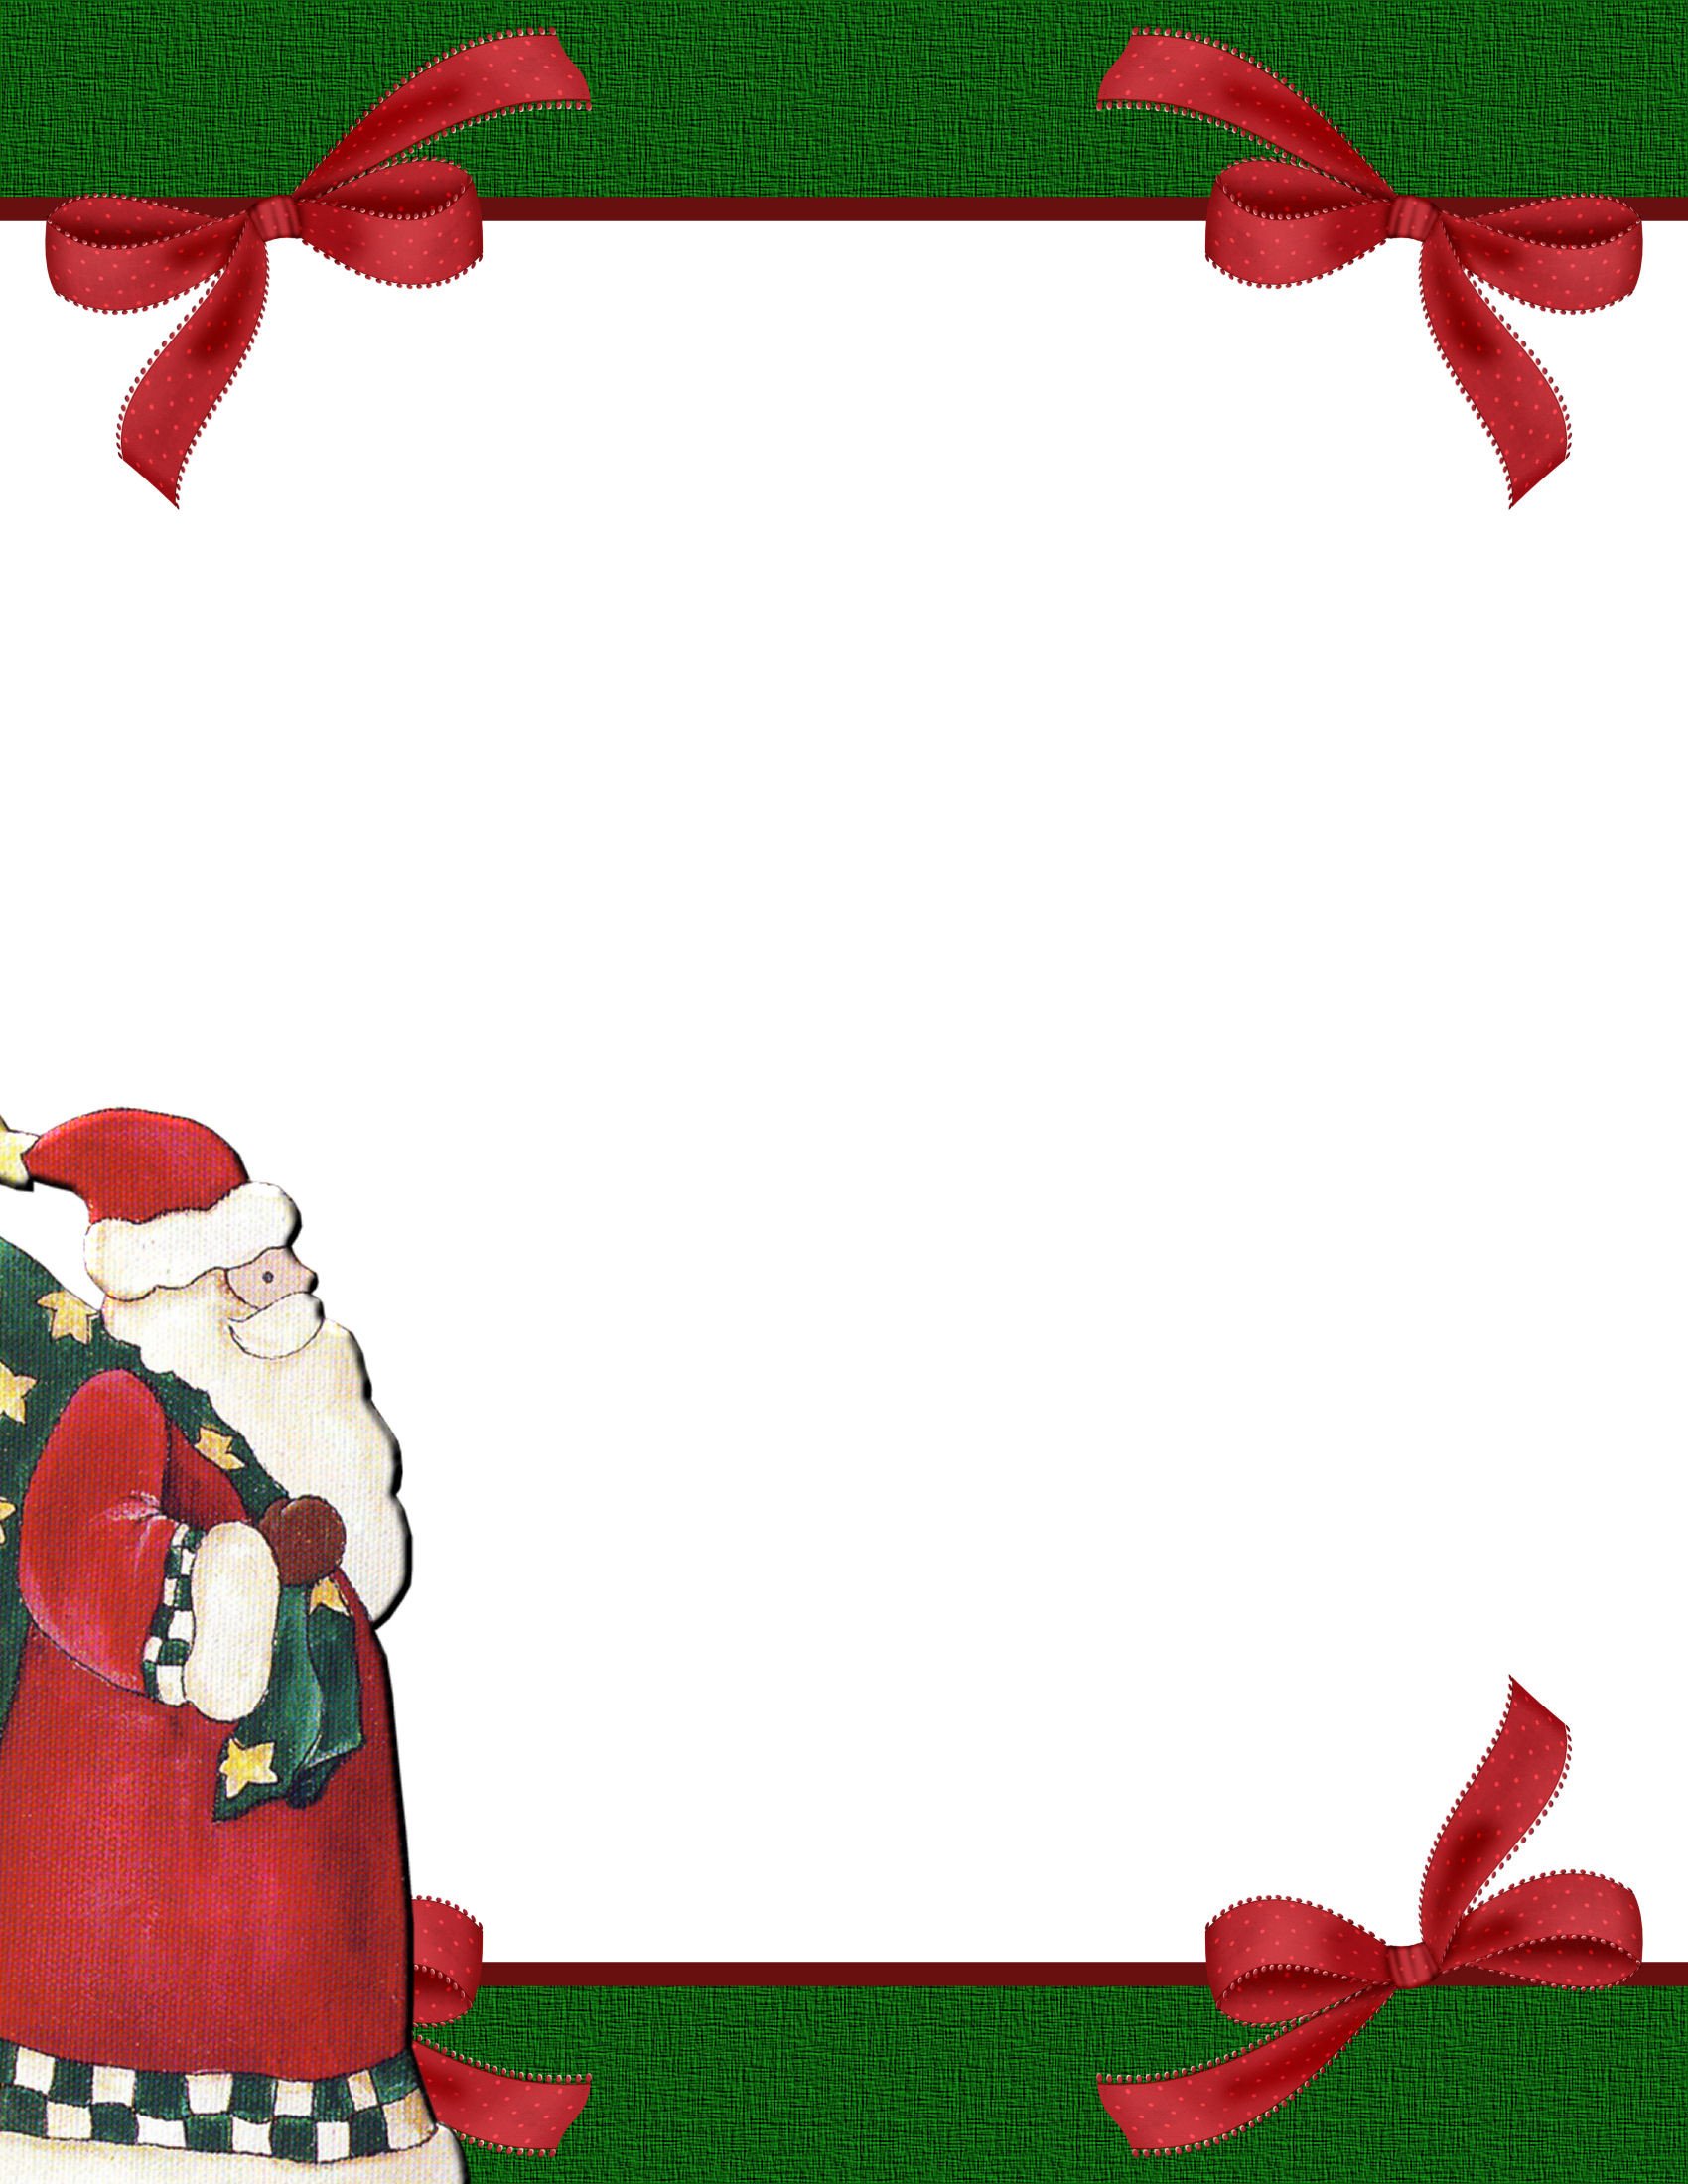 Christmas 2 FREE Stationery Template Downloads